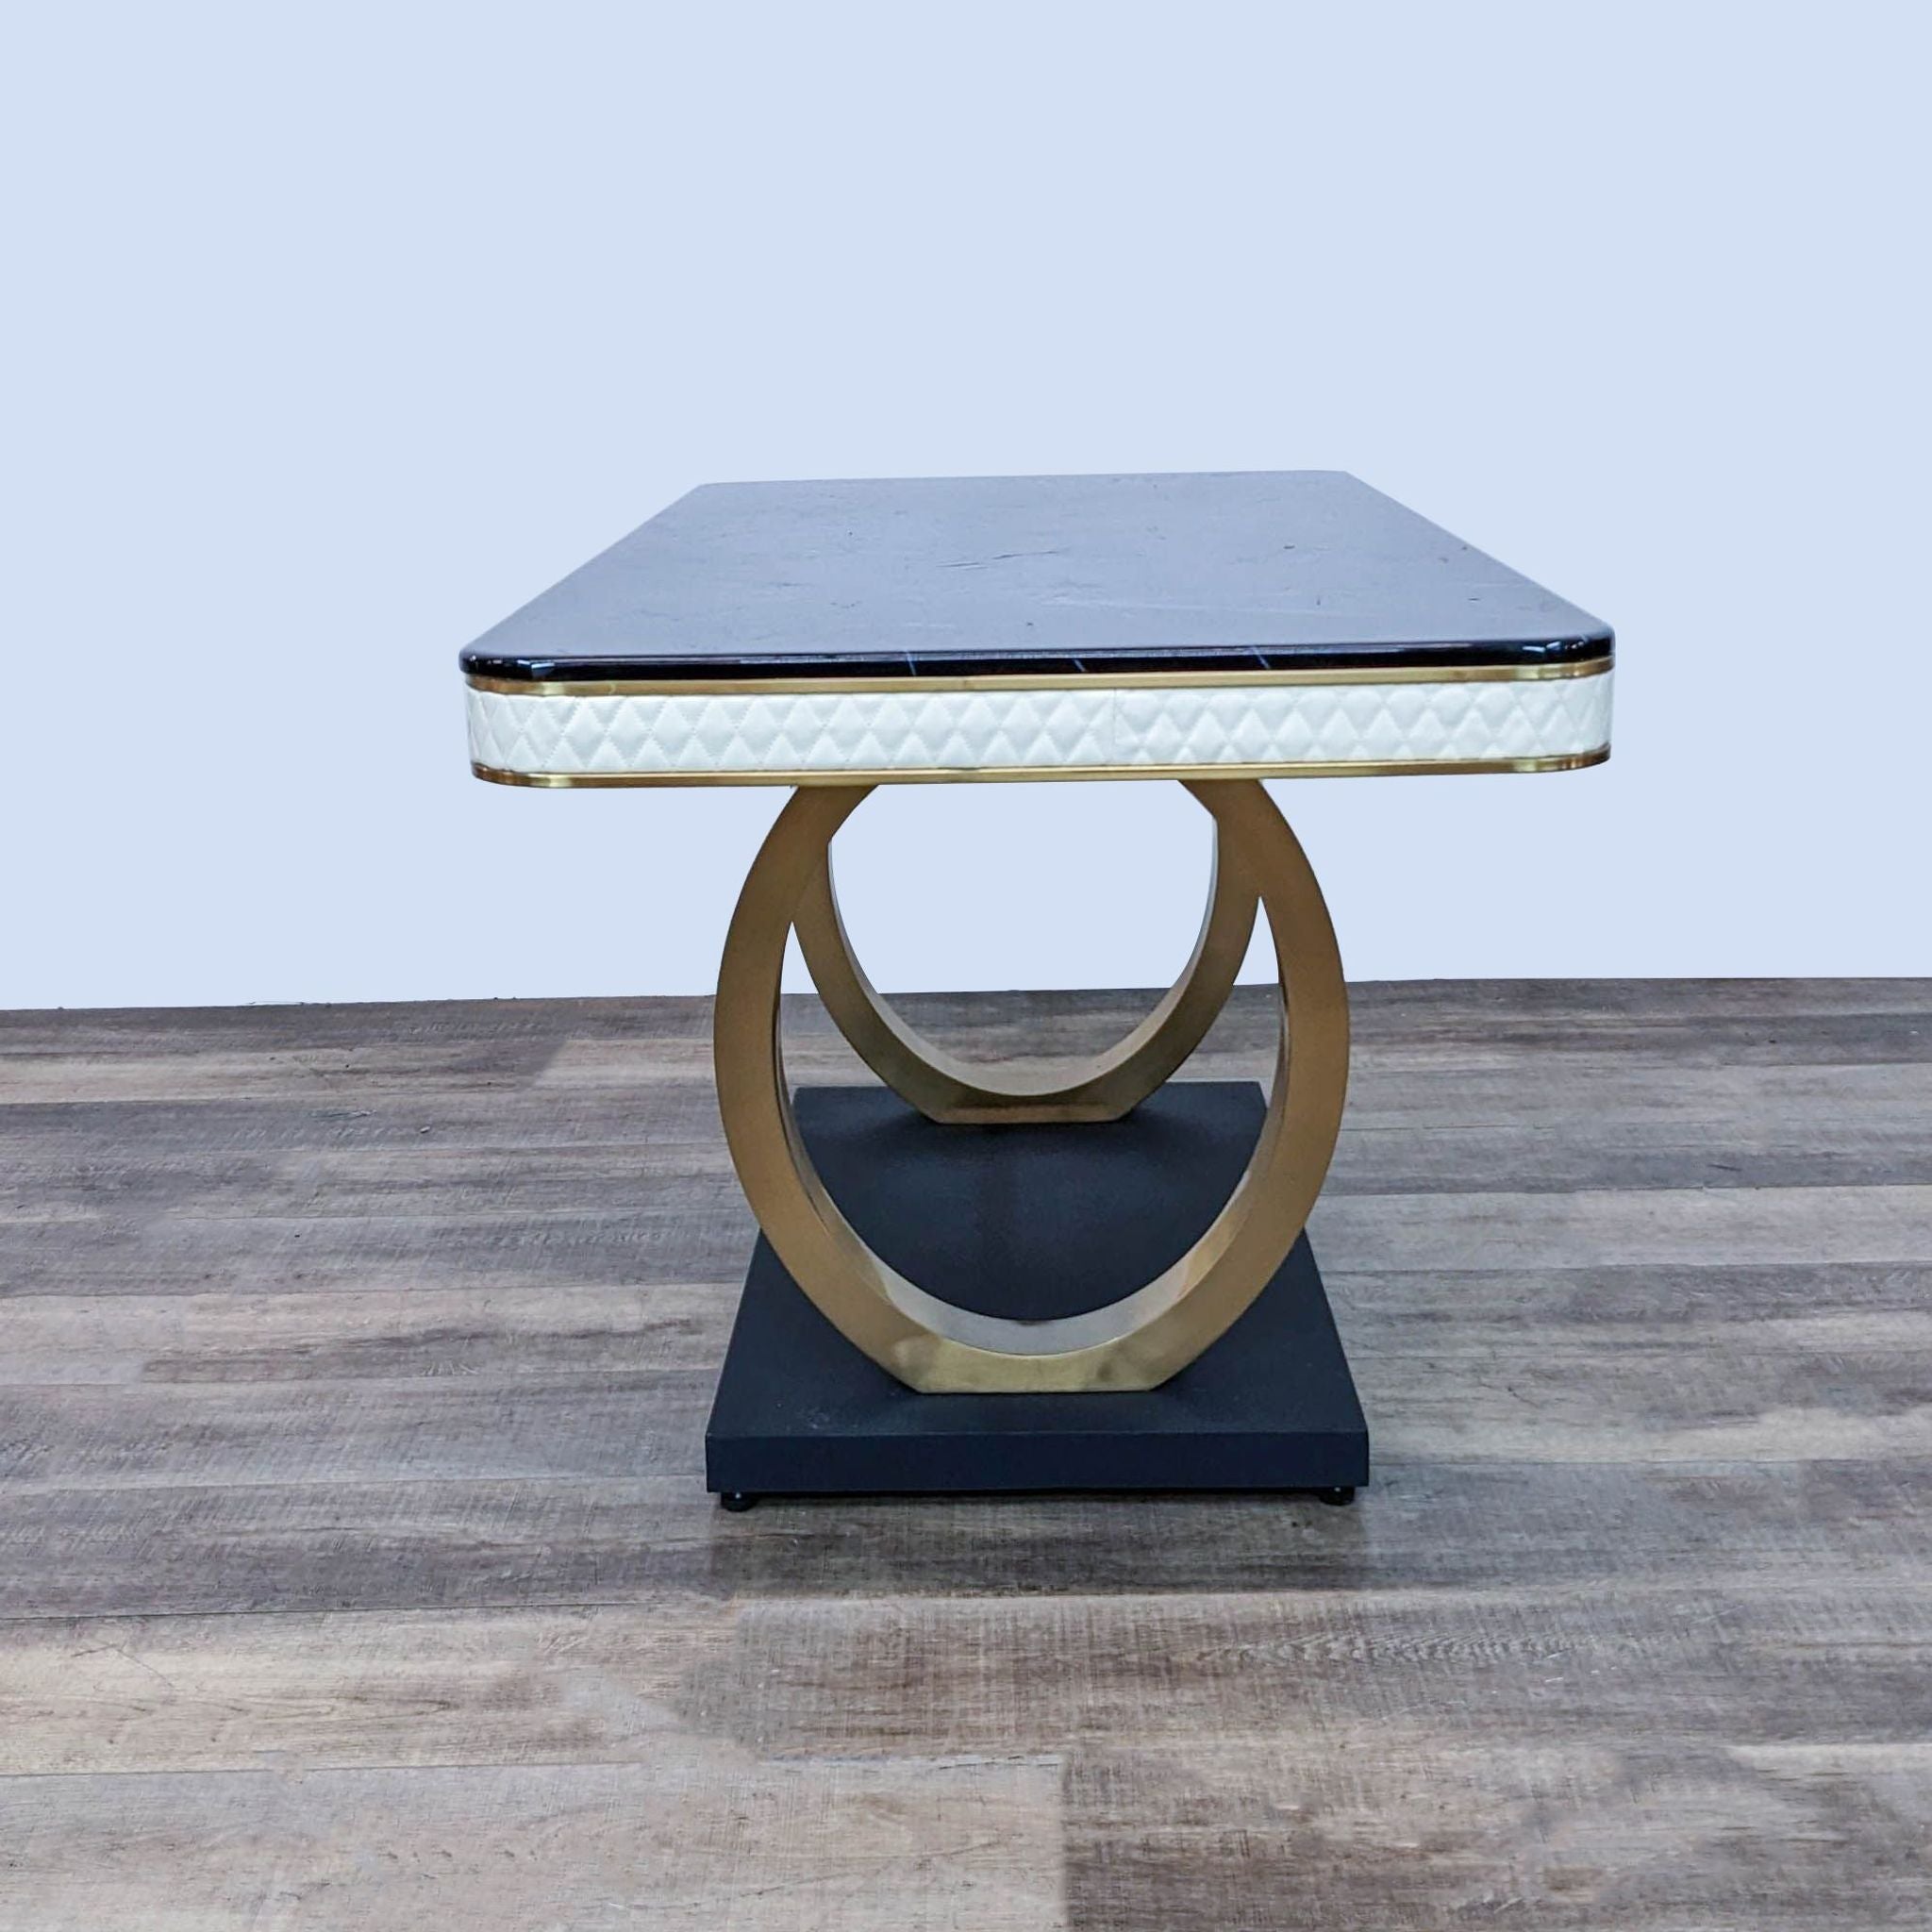 Modern Everly Quinn dining table with a black marble surface and unique double looped golden base, showcasing diamond-patterned edges.